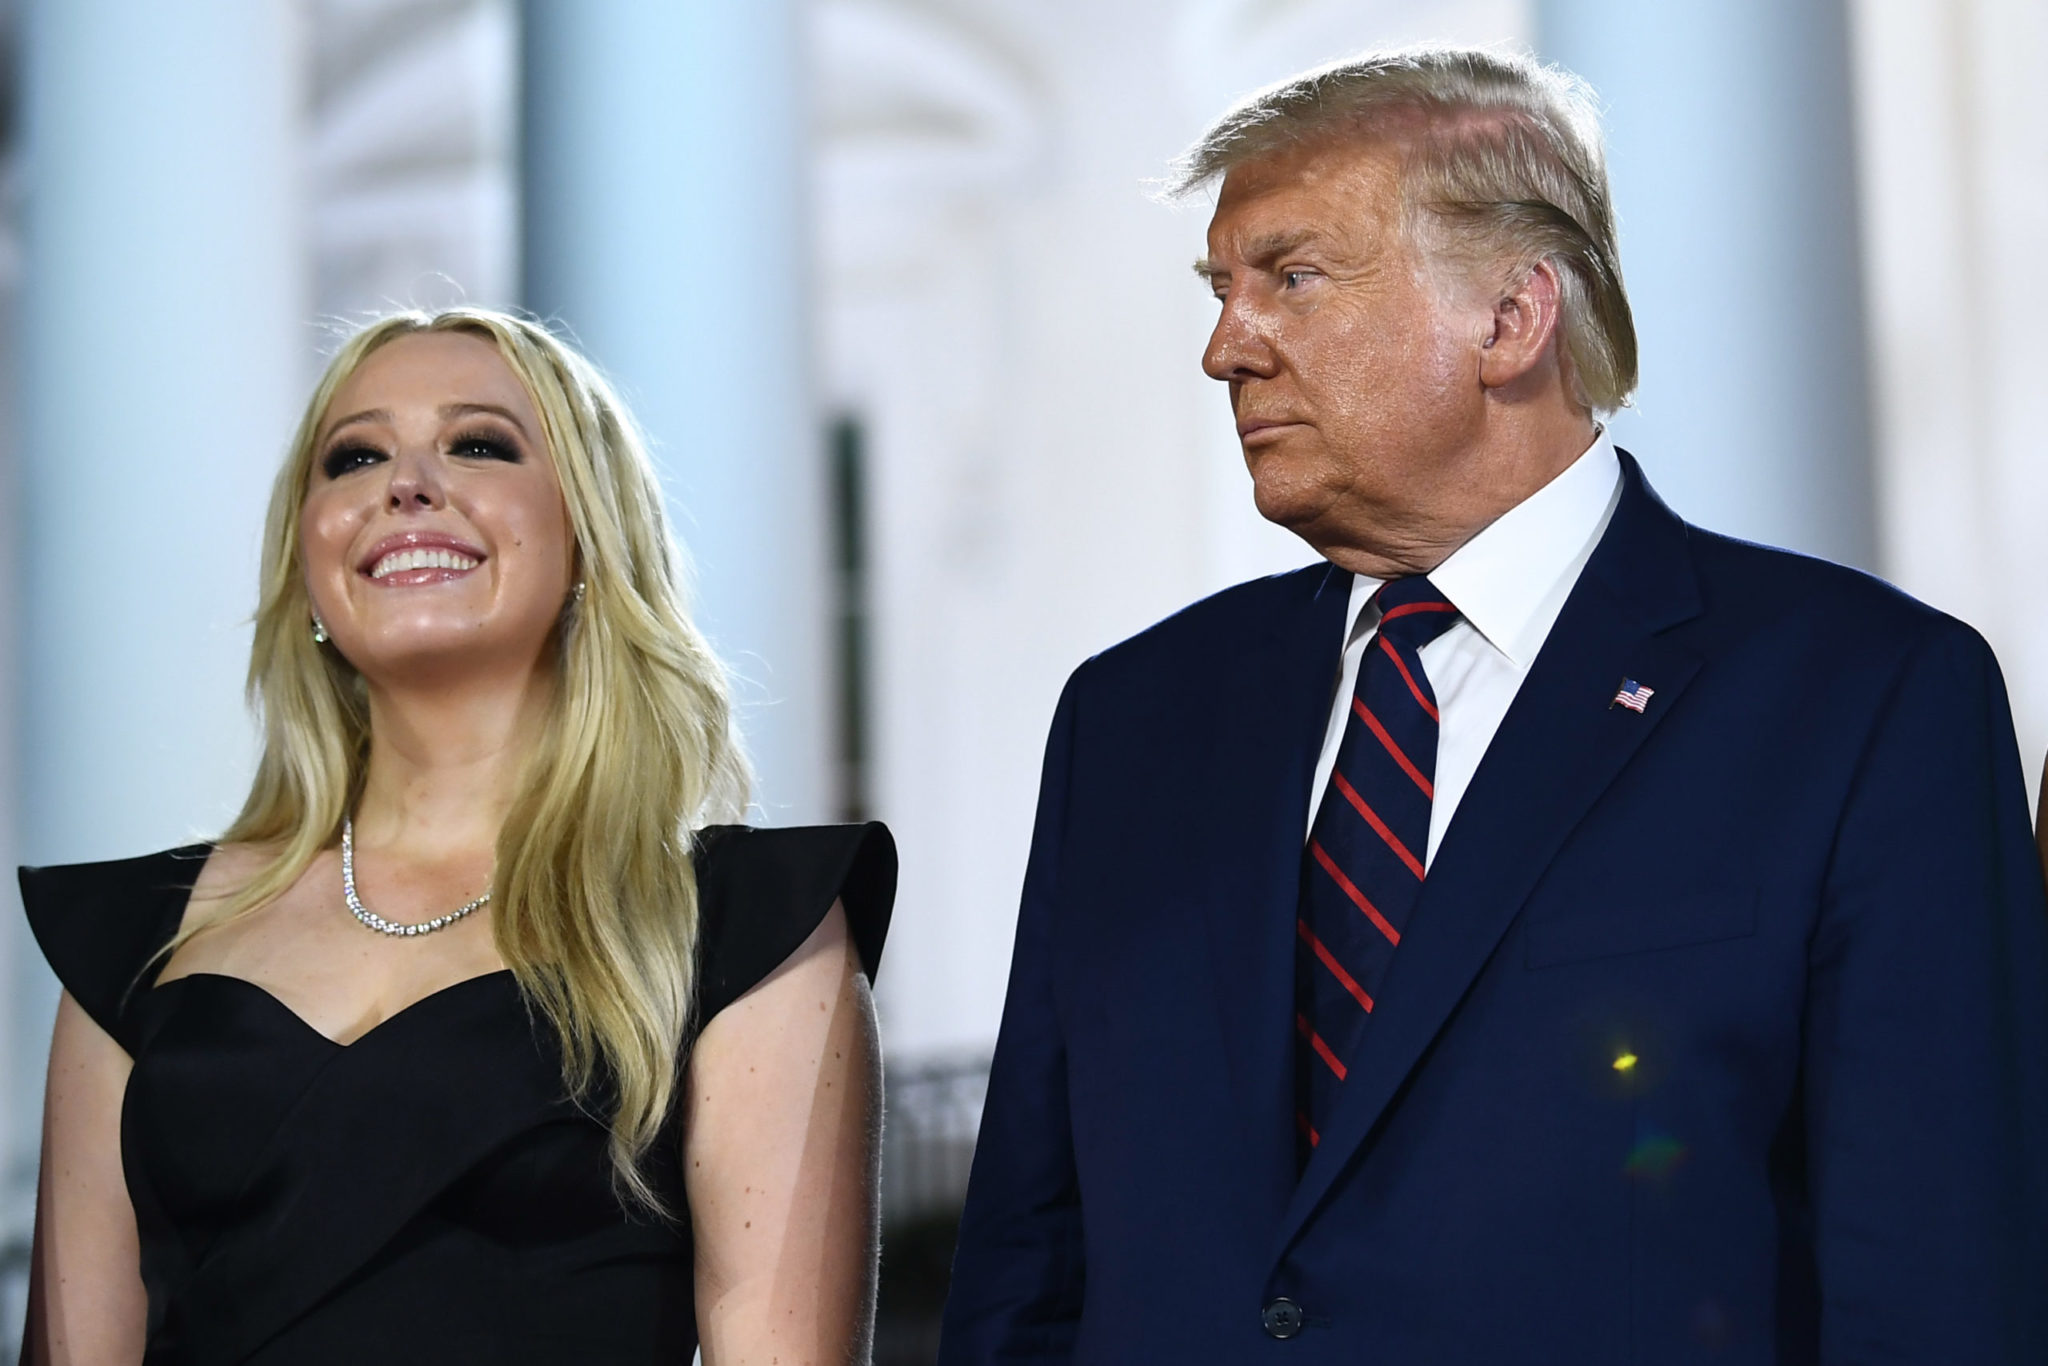 US President Donald Trump stands with daughter Tiffany Trump after he delivered his acceptance speech for the Republican Party nomination for reelection during the final day of the Republican National Convention at the South Lawn of the White House in Washington, DC on August 27, 2020. 